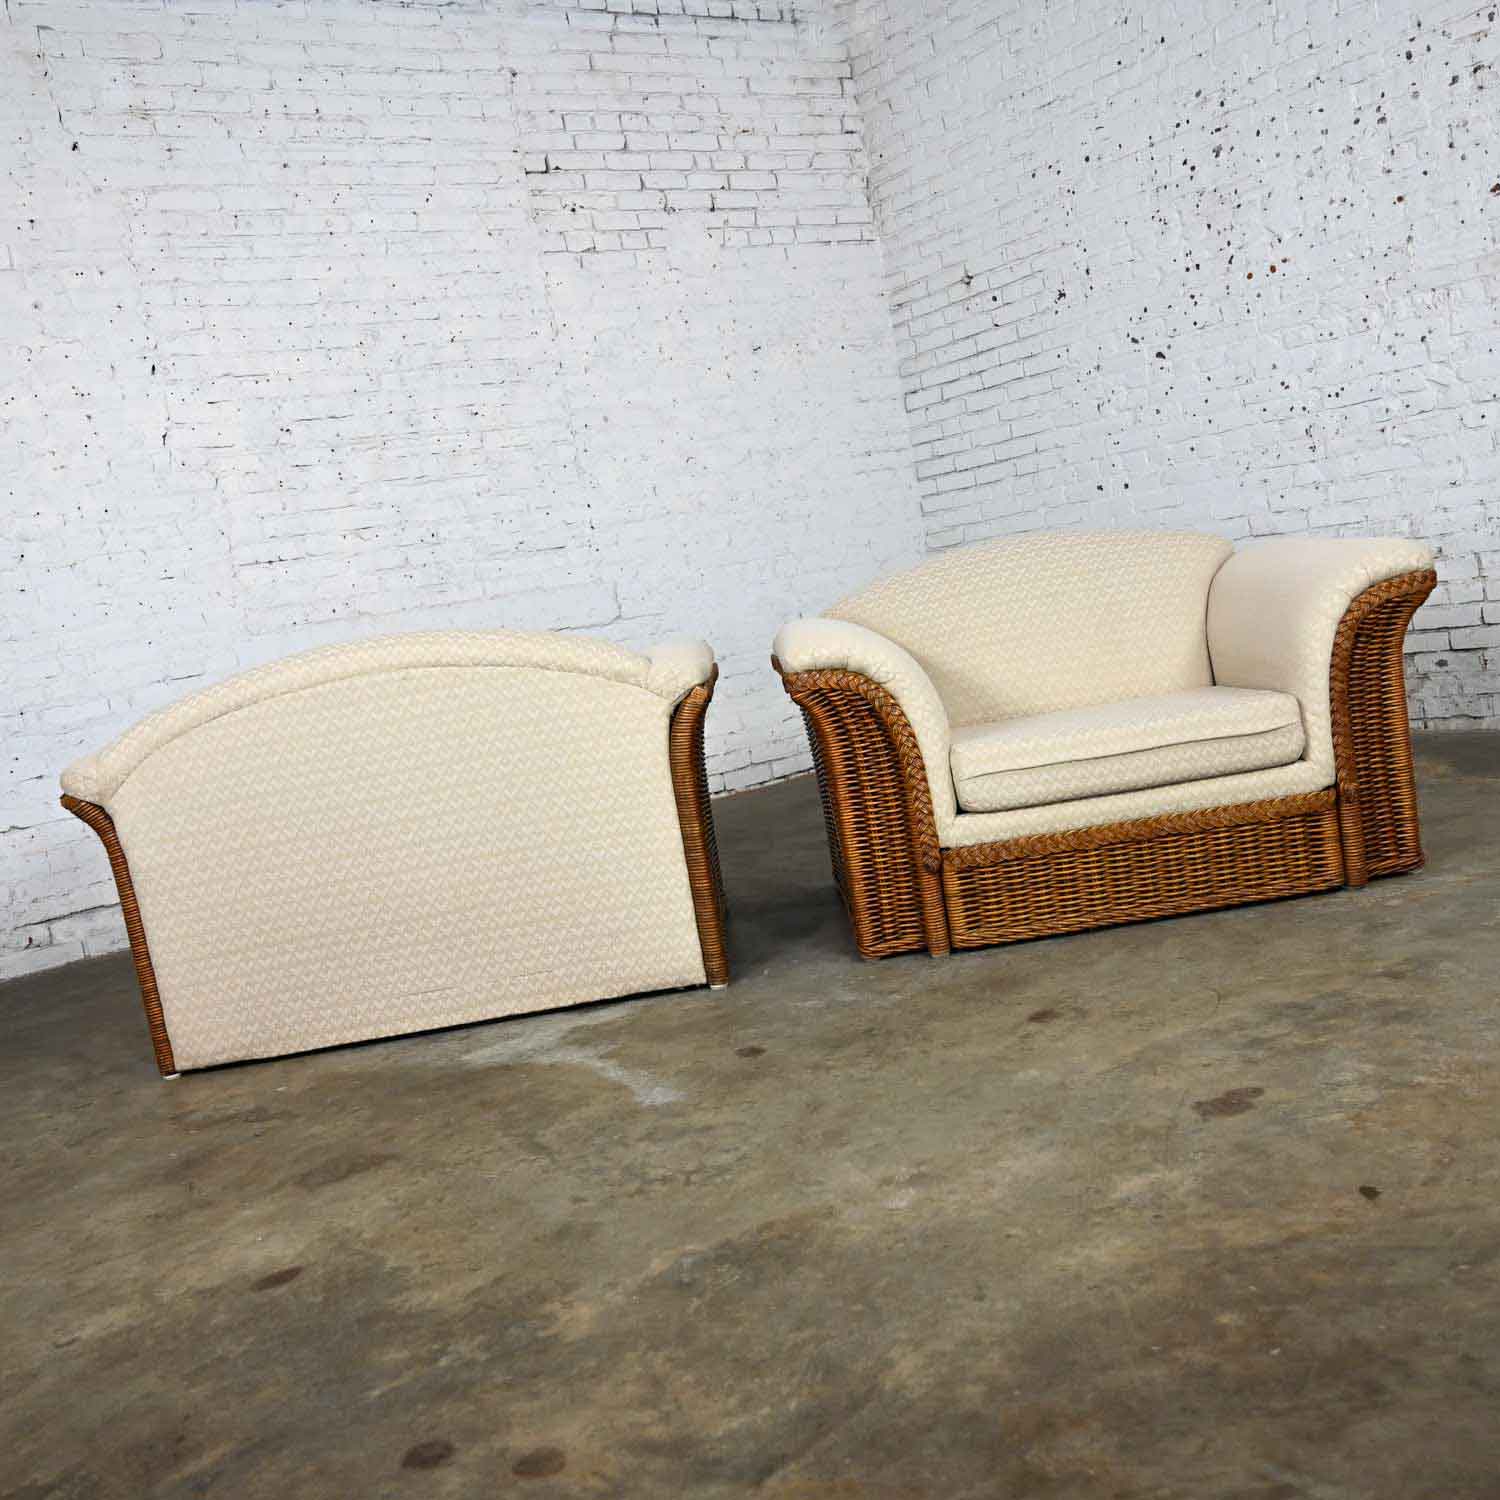 Rattan Wicker Pair of Oversized Lounge Chairs Manner of Michael Taylor